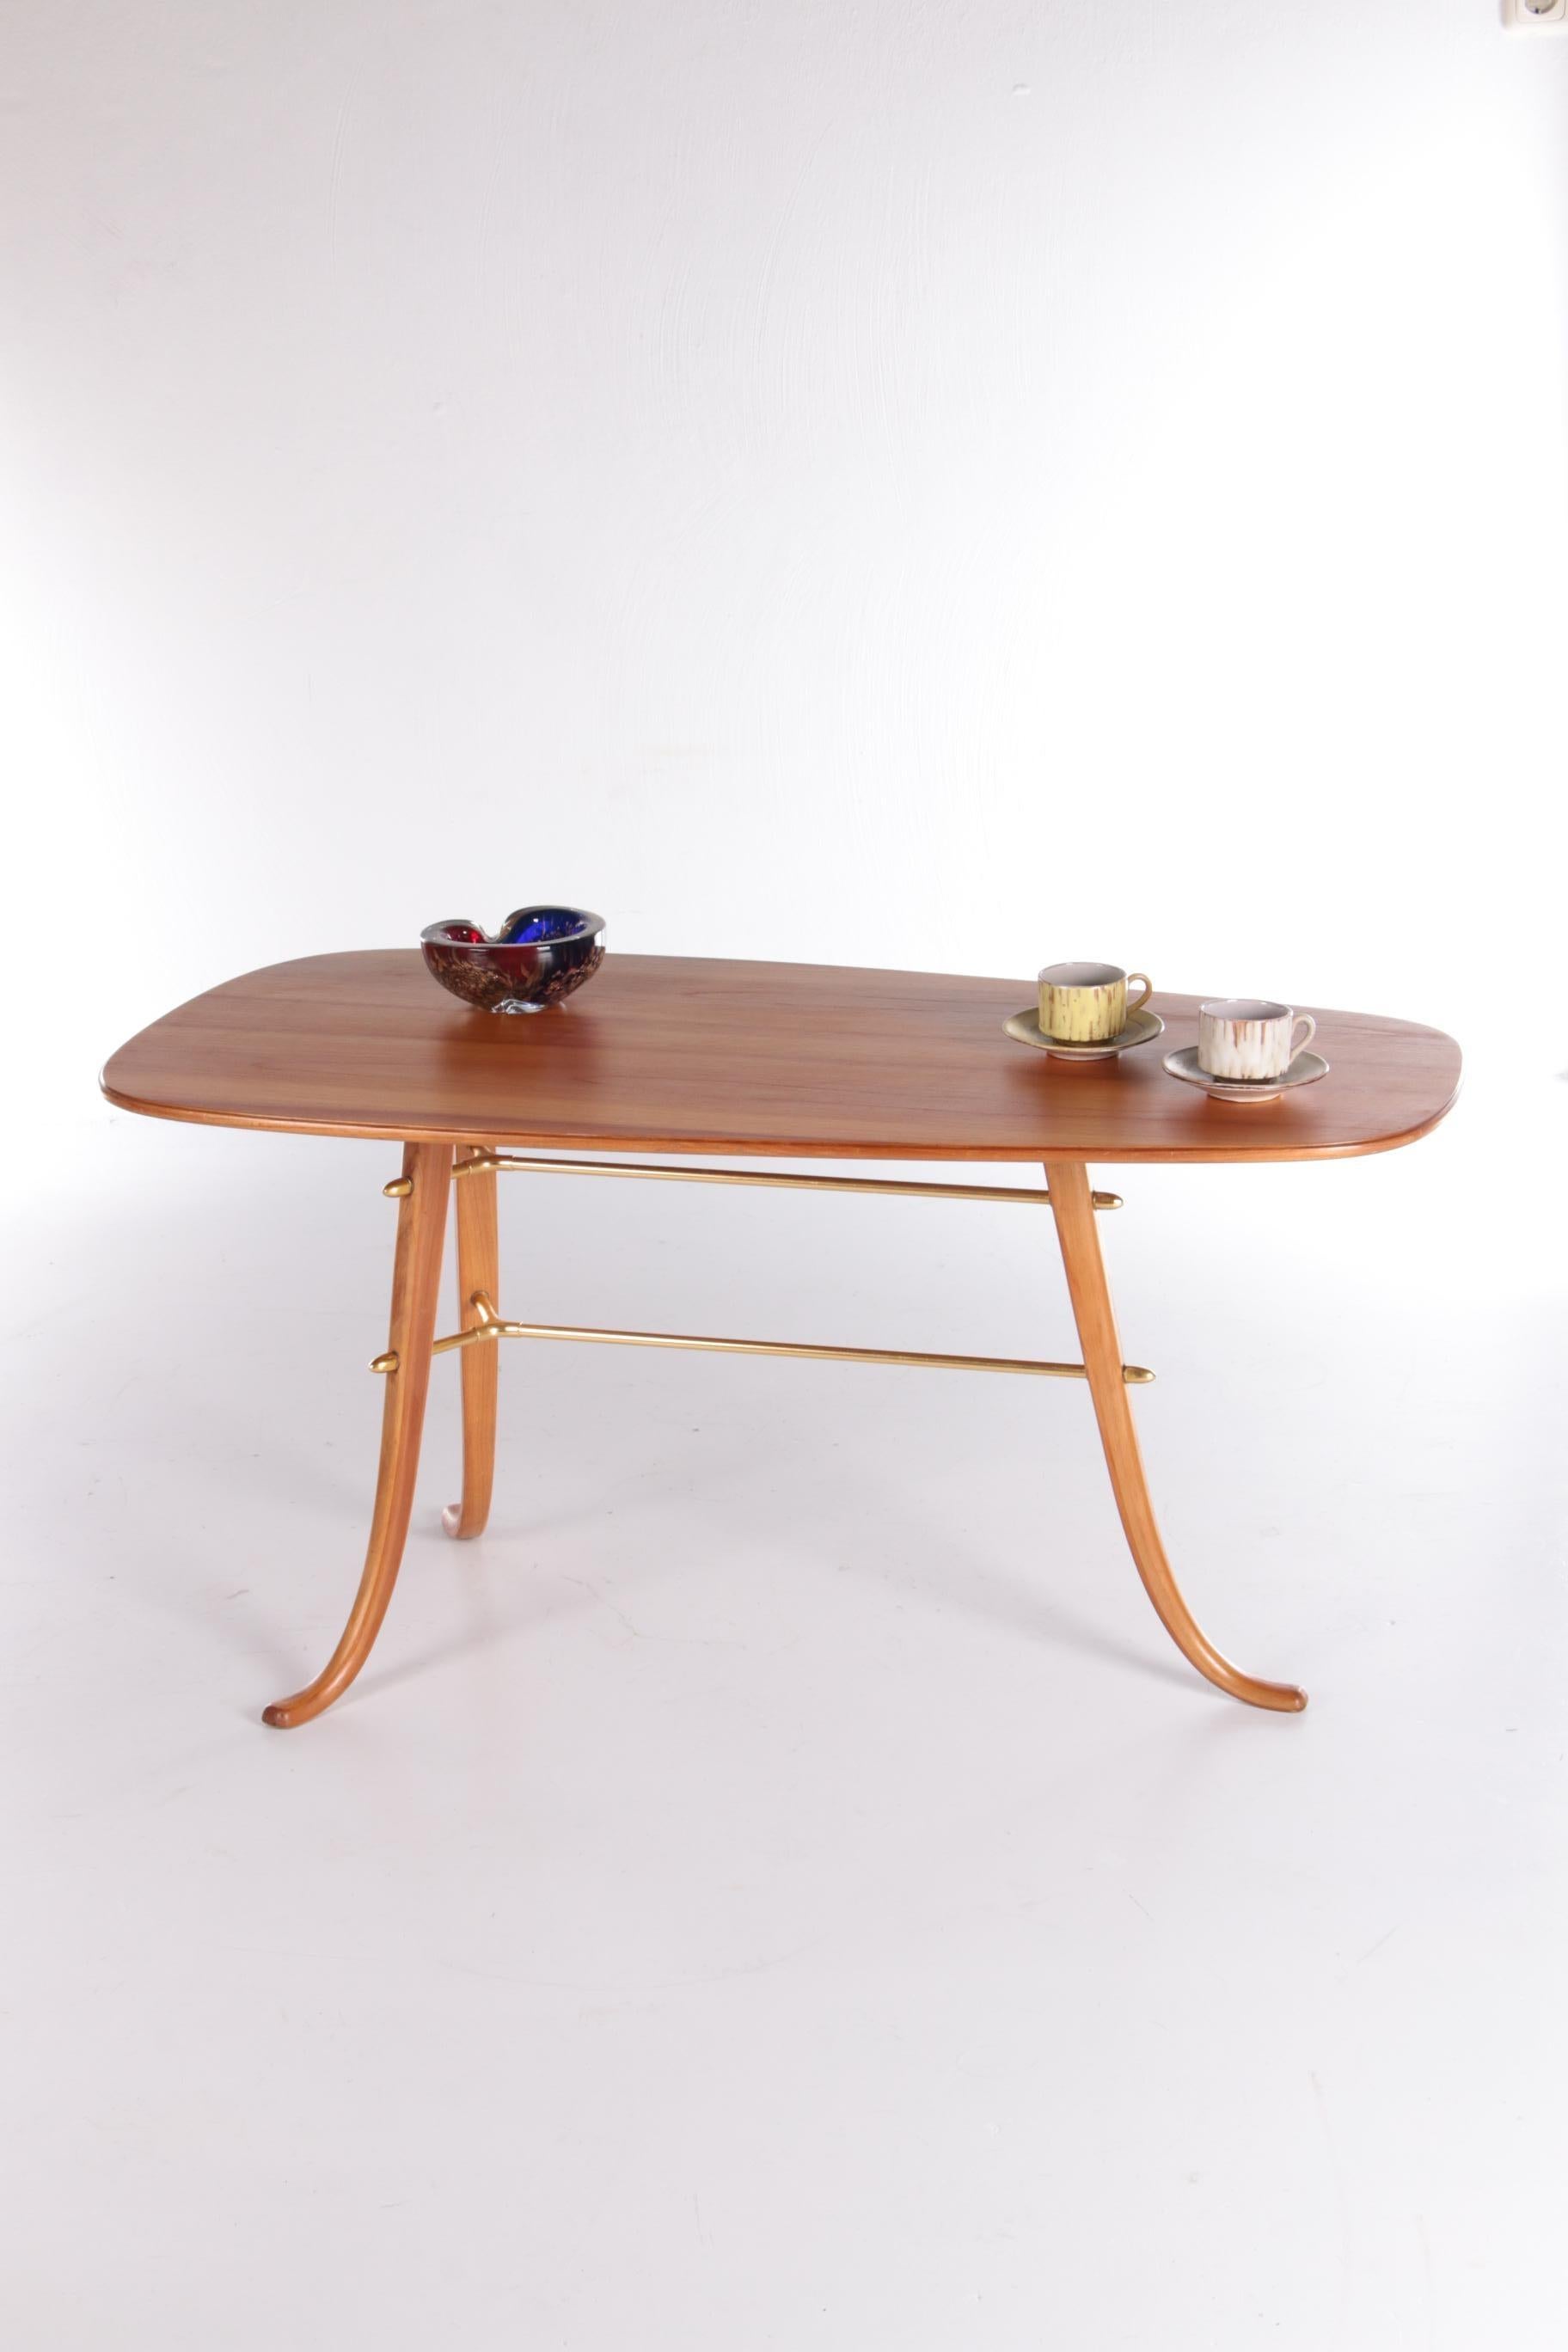 Vintage coffee table with 3 legs and brass details Scandinavia.

Beautiful coffee table made in Scandinavia.

An oval top with three slender legs and the connection of the bottom is made of brass.

This table still looks like new, no signs of